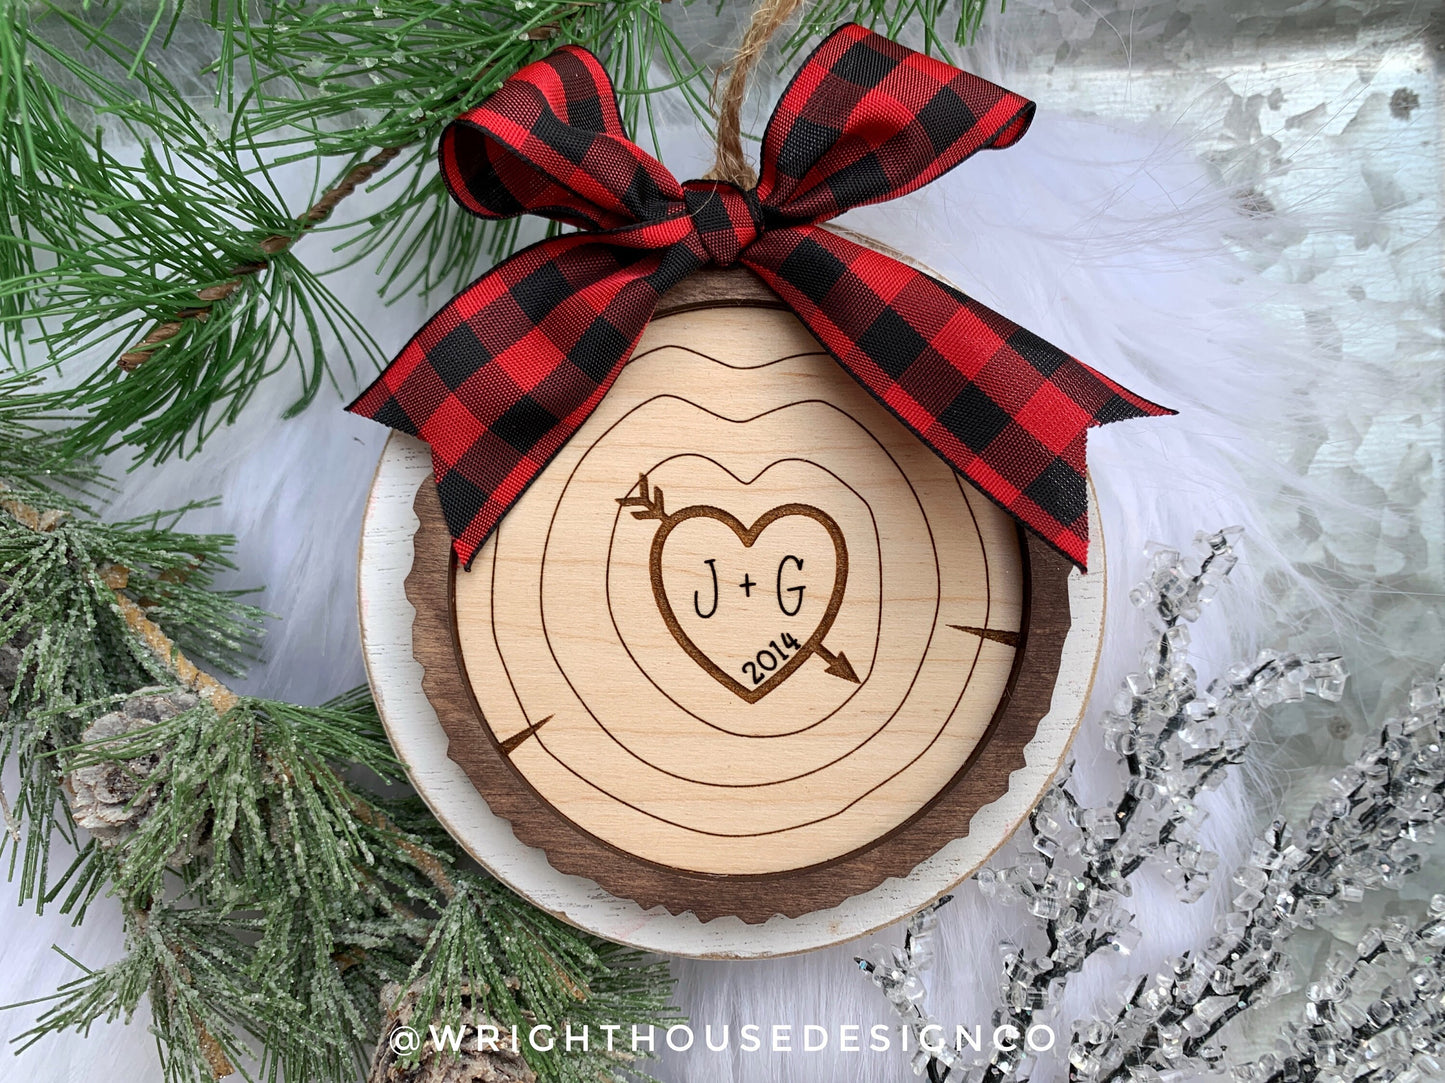 Couples Carved Initials - Wood Slice Ornaments - Rustic Farmhouse Christmas Decor - Tree Cookies - Buffalo Plaid Bows - Wooden Stocking Tags